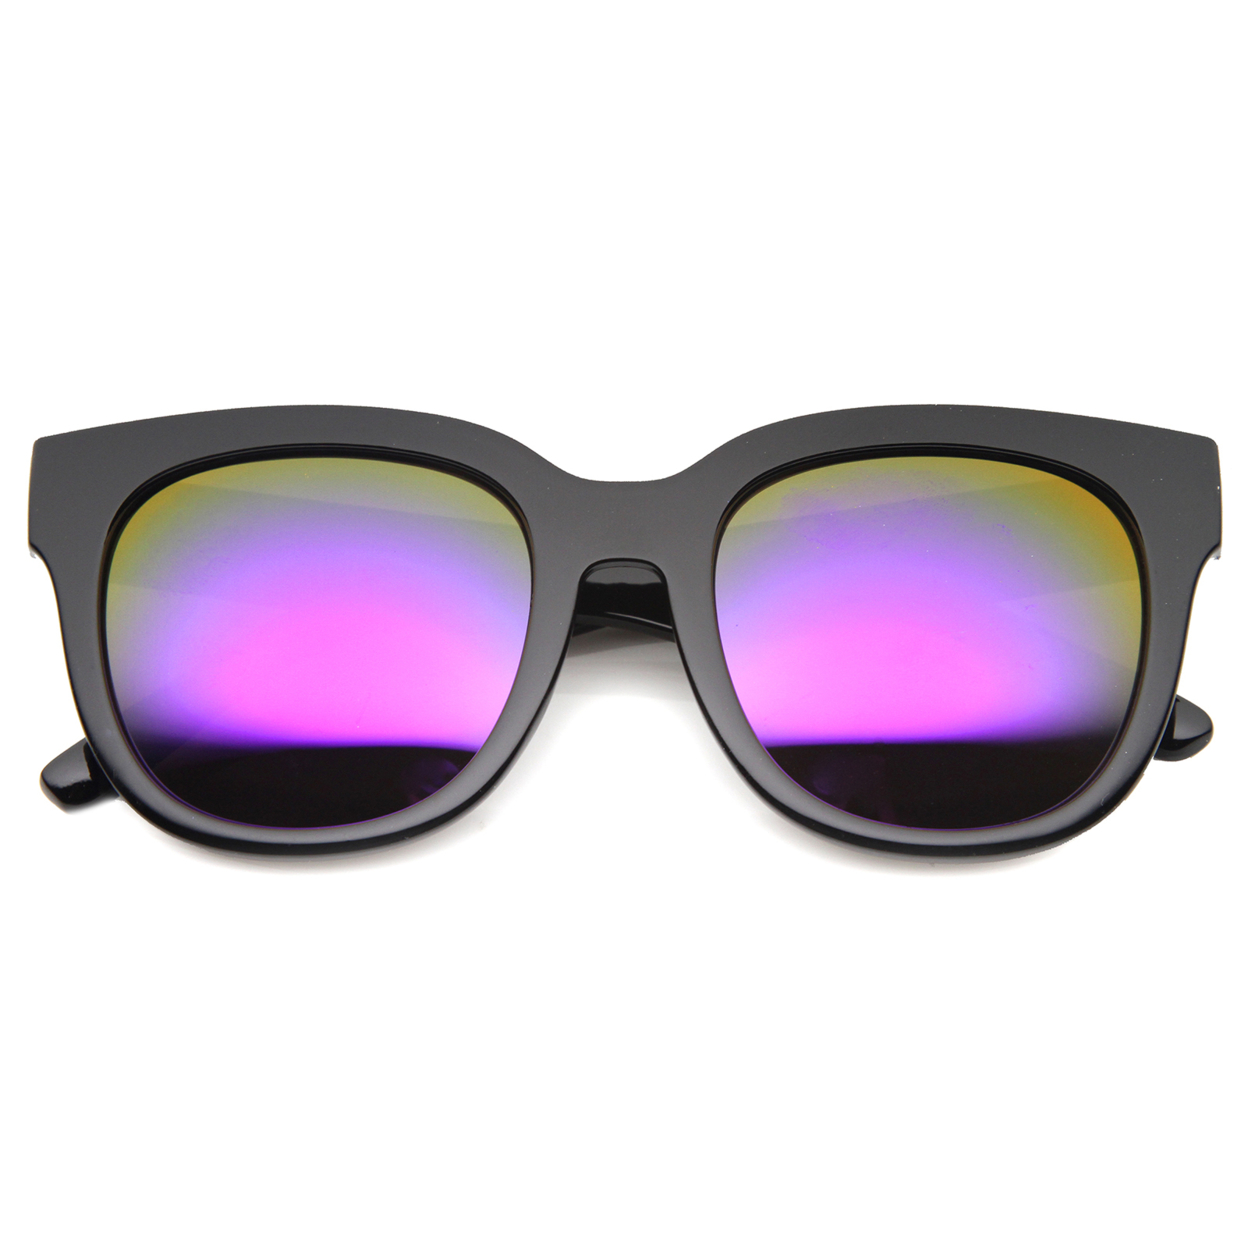 Womens Horn Rimmed Sunglasses With UV400 Protected Mirrored Lens 9962 - Black / Pink